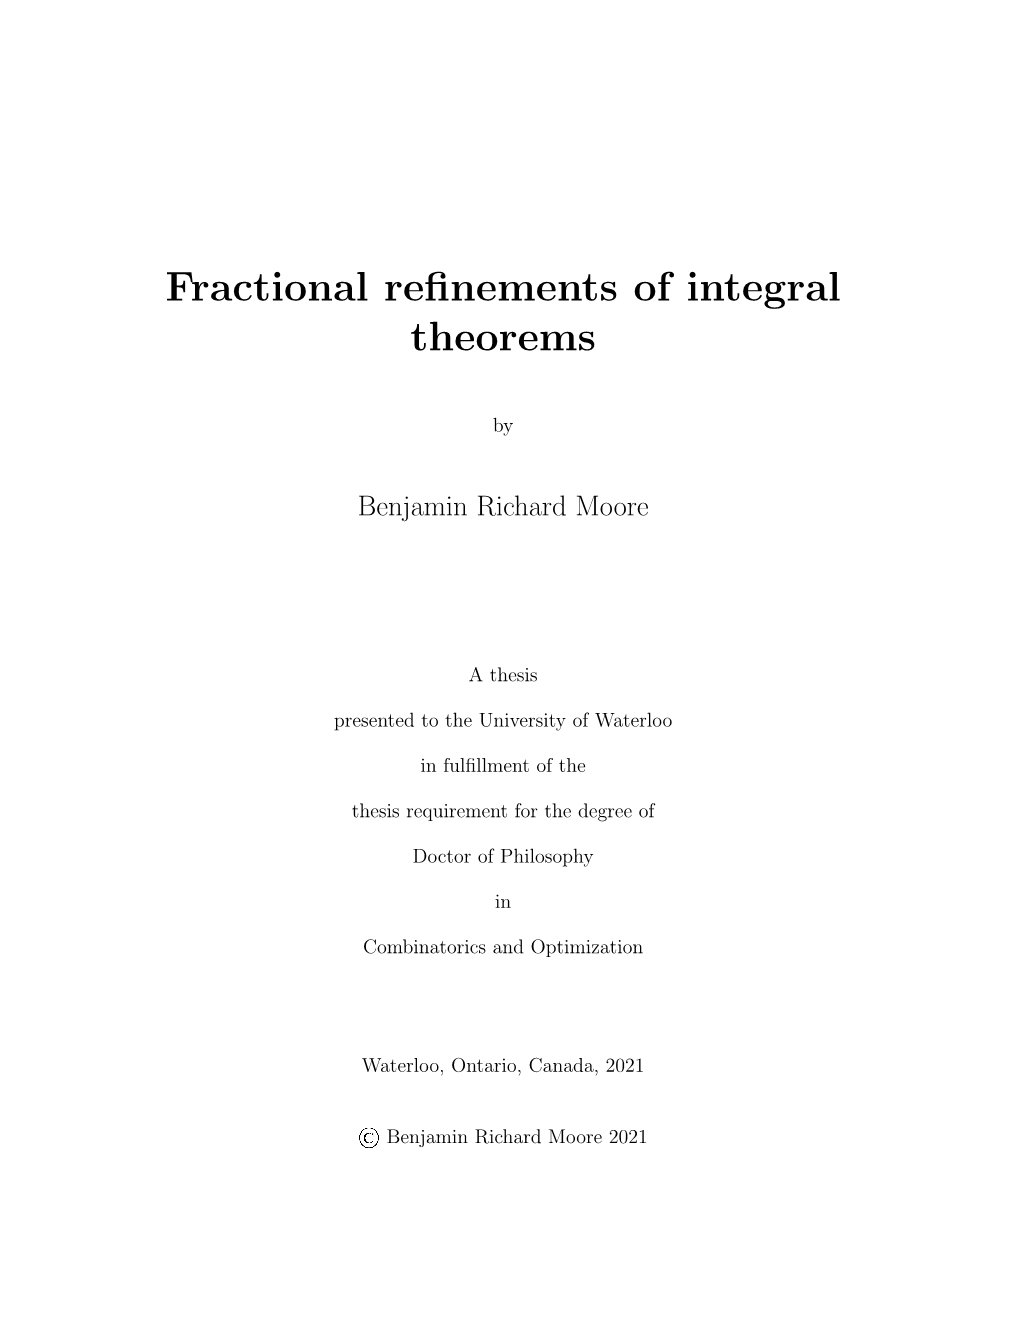 Fractional Refinements of Integral Theorems